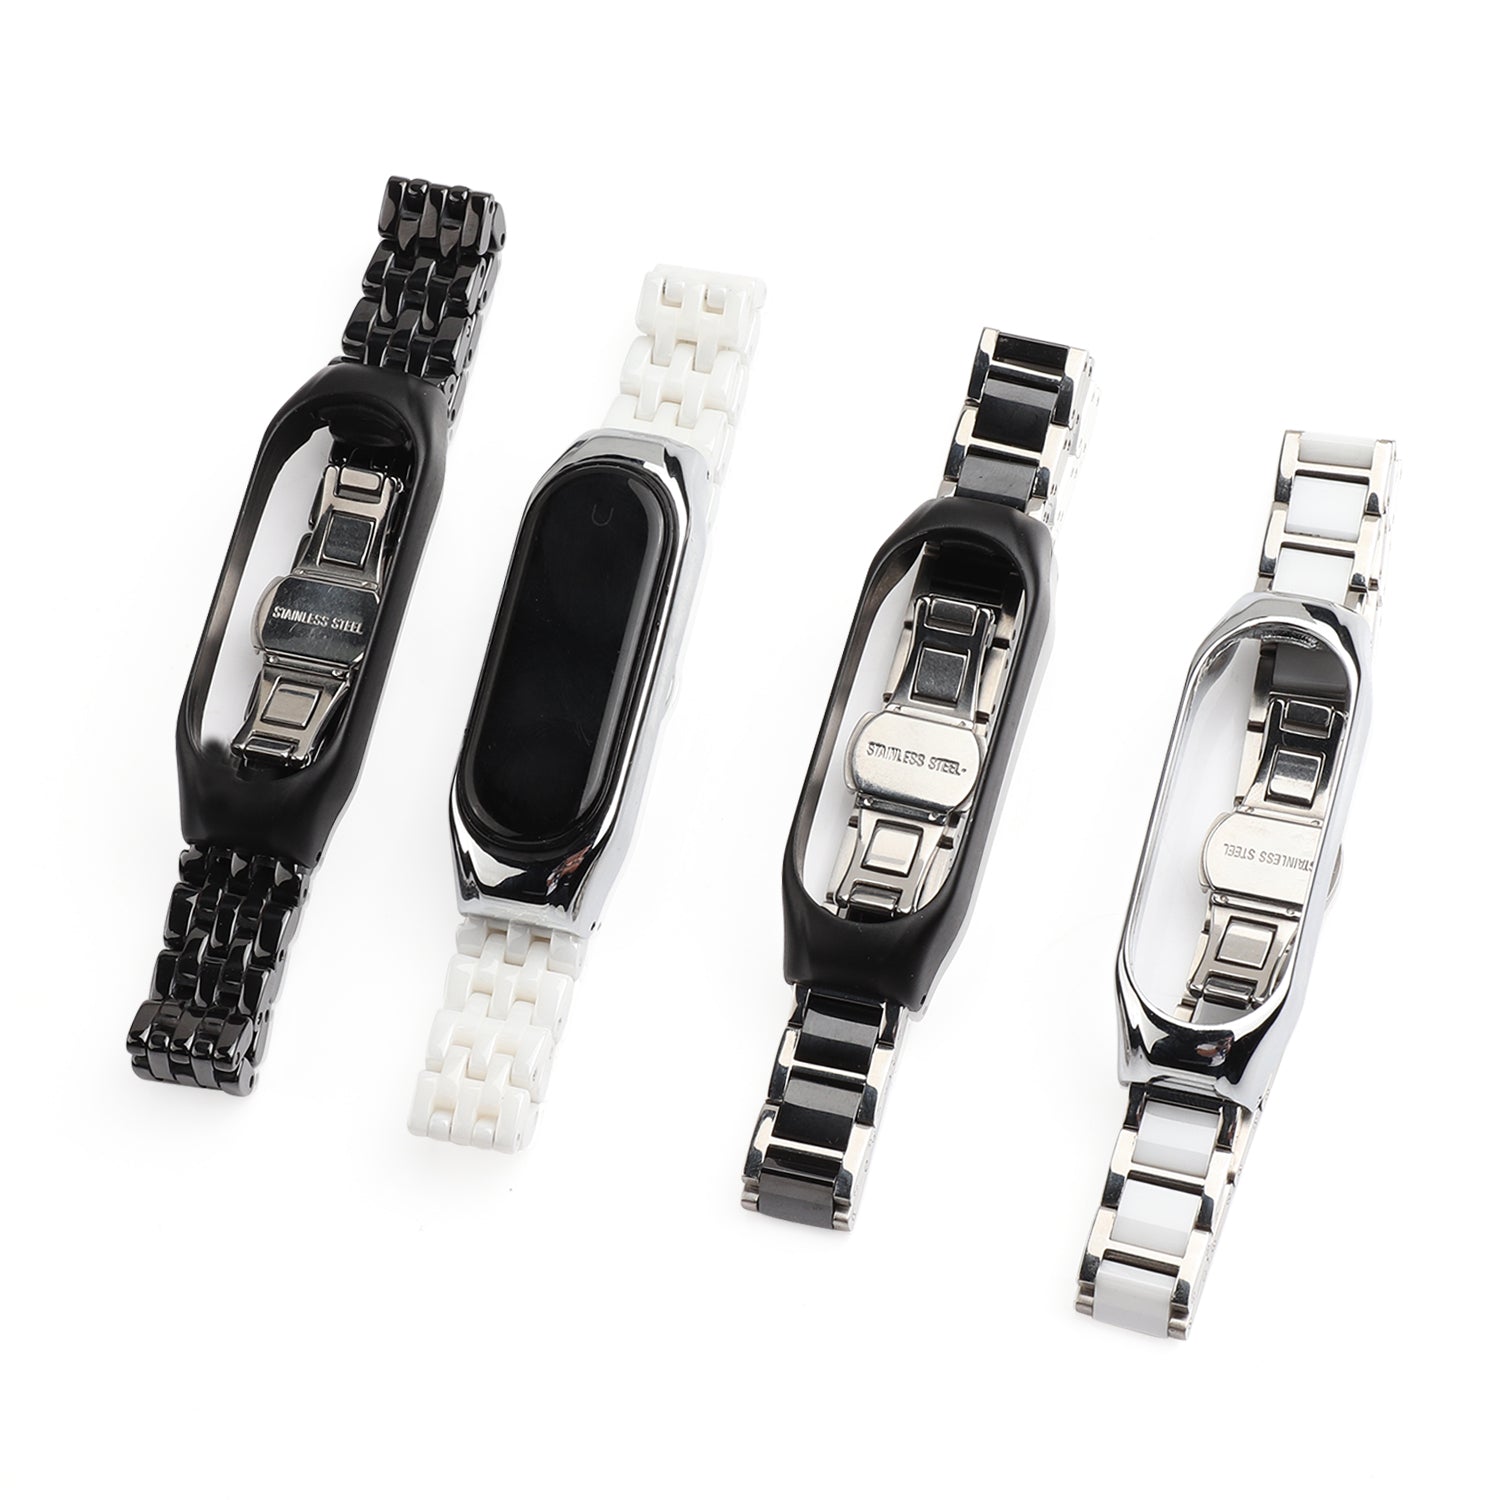 For Xiaomi Mi Band 5/Mi Band 6 Ceramics+Stainless Steel Watch Strap Replacement Watch Band - Five Beads Black